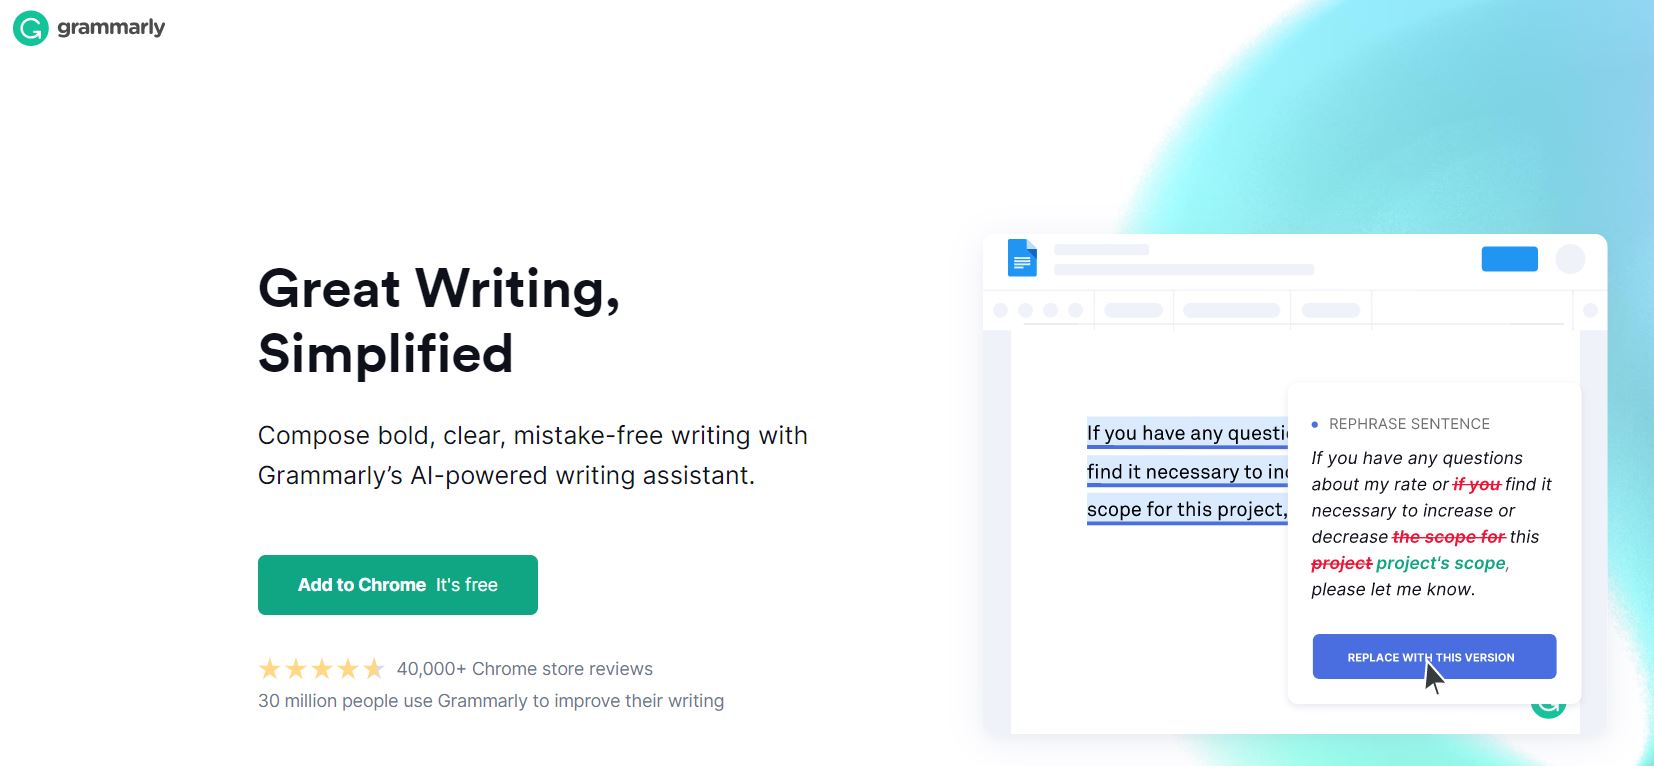 Grammarly checks your content for spelling and grammar mistakes.